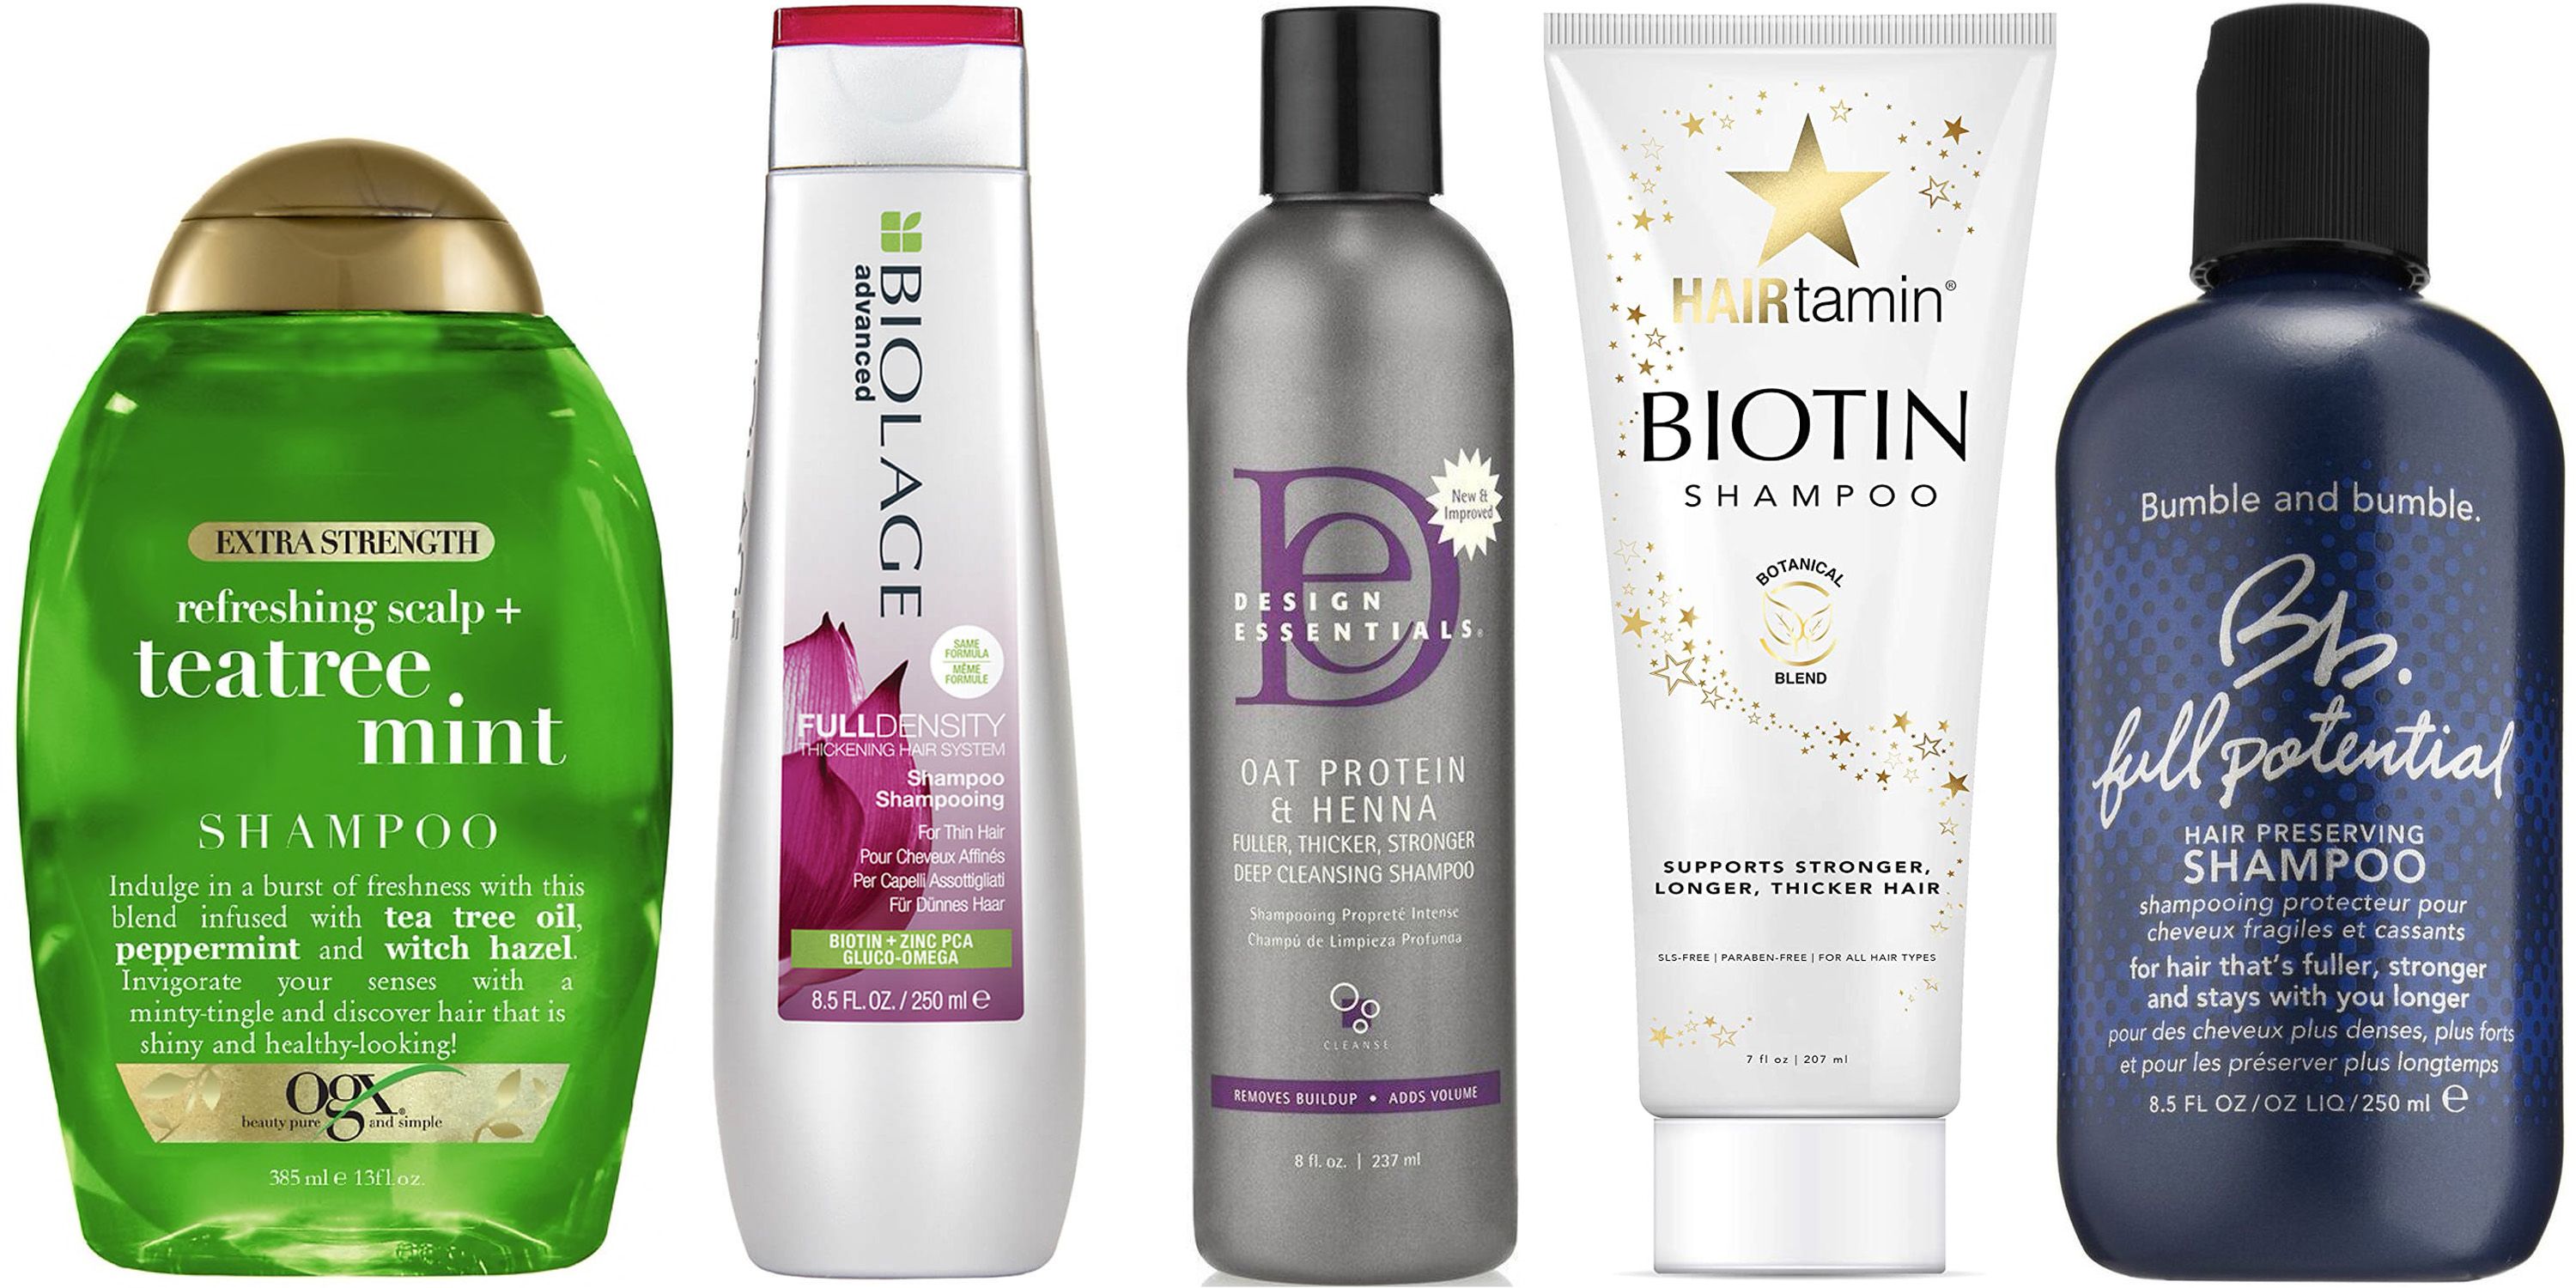 10 Best Shampoo And Conditioner To Grow Thicker Hair